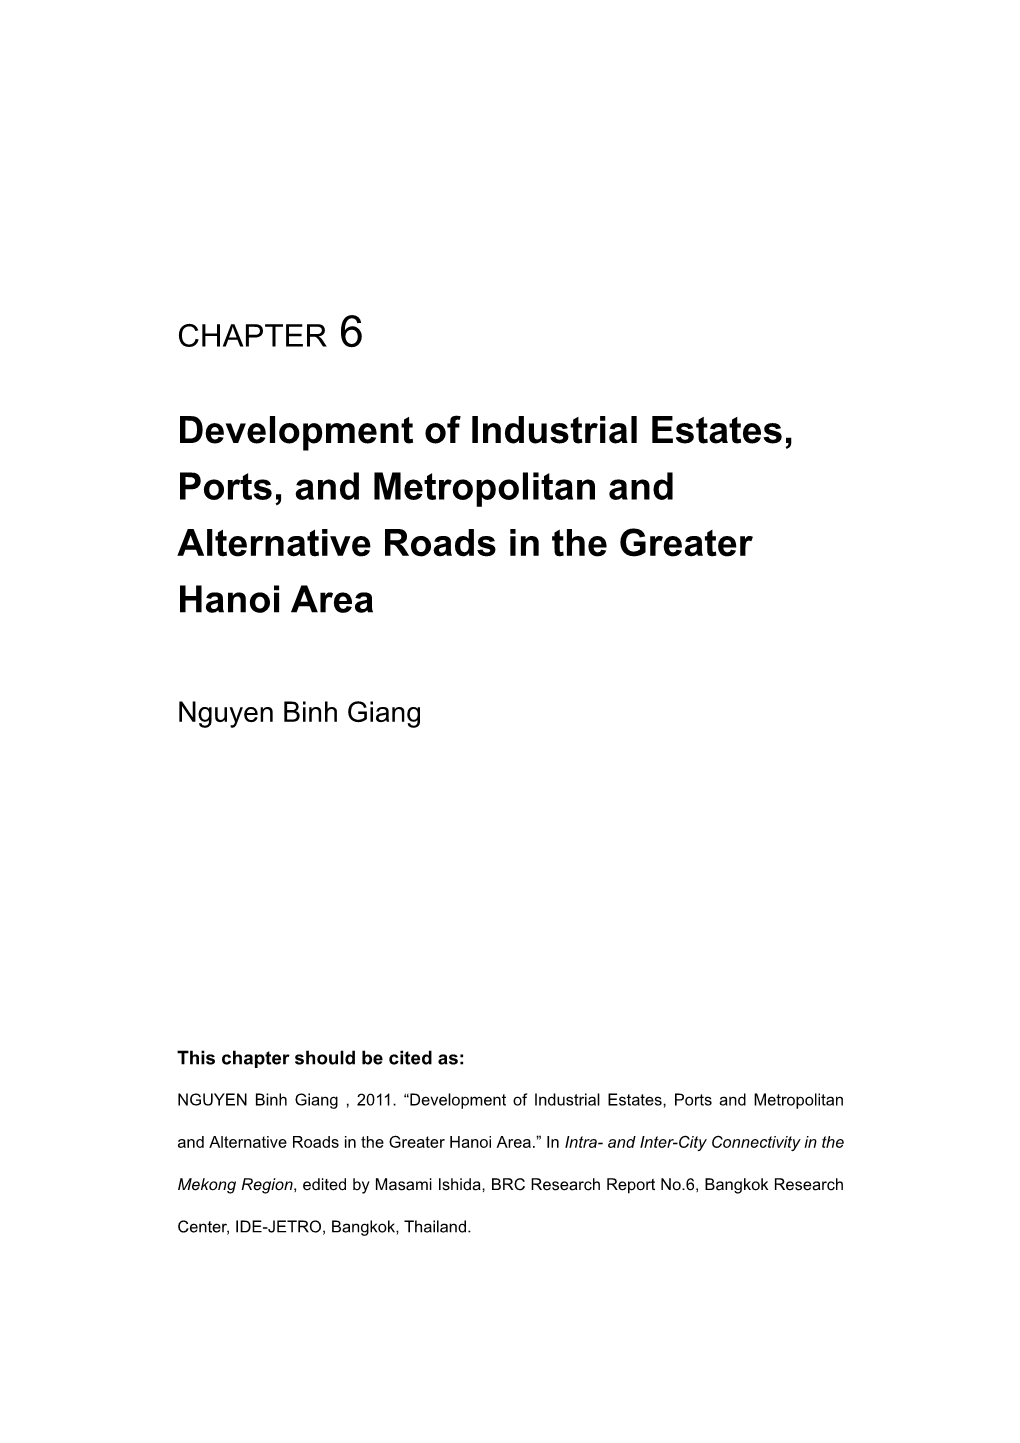 Development of Industrial Estates, Ports, and Metropolitan and Alternative Roads in the Greater Hanoi Area